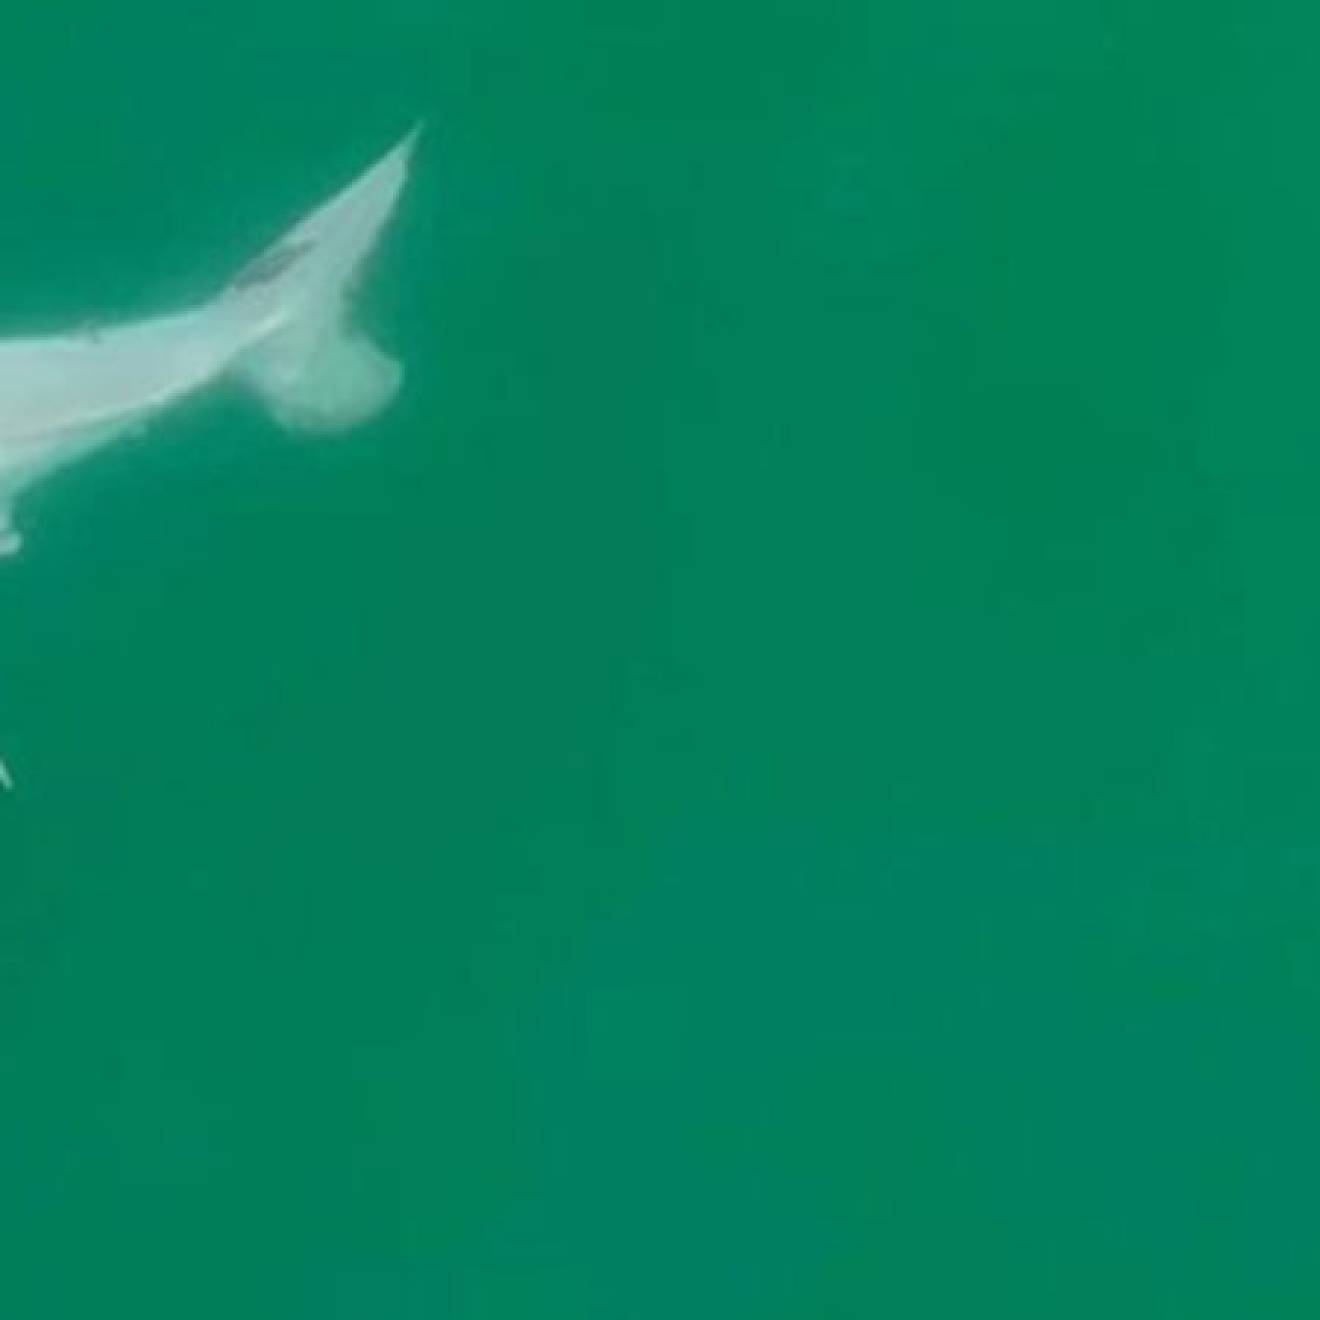 Great white shark baby in a green ocean